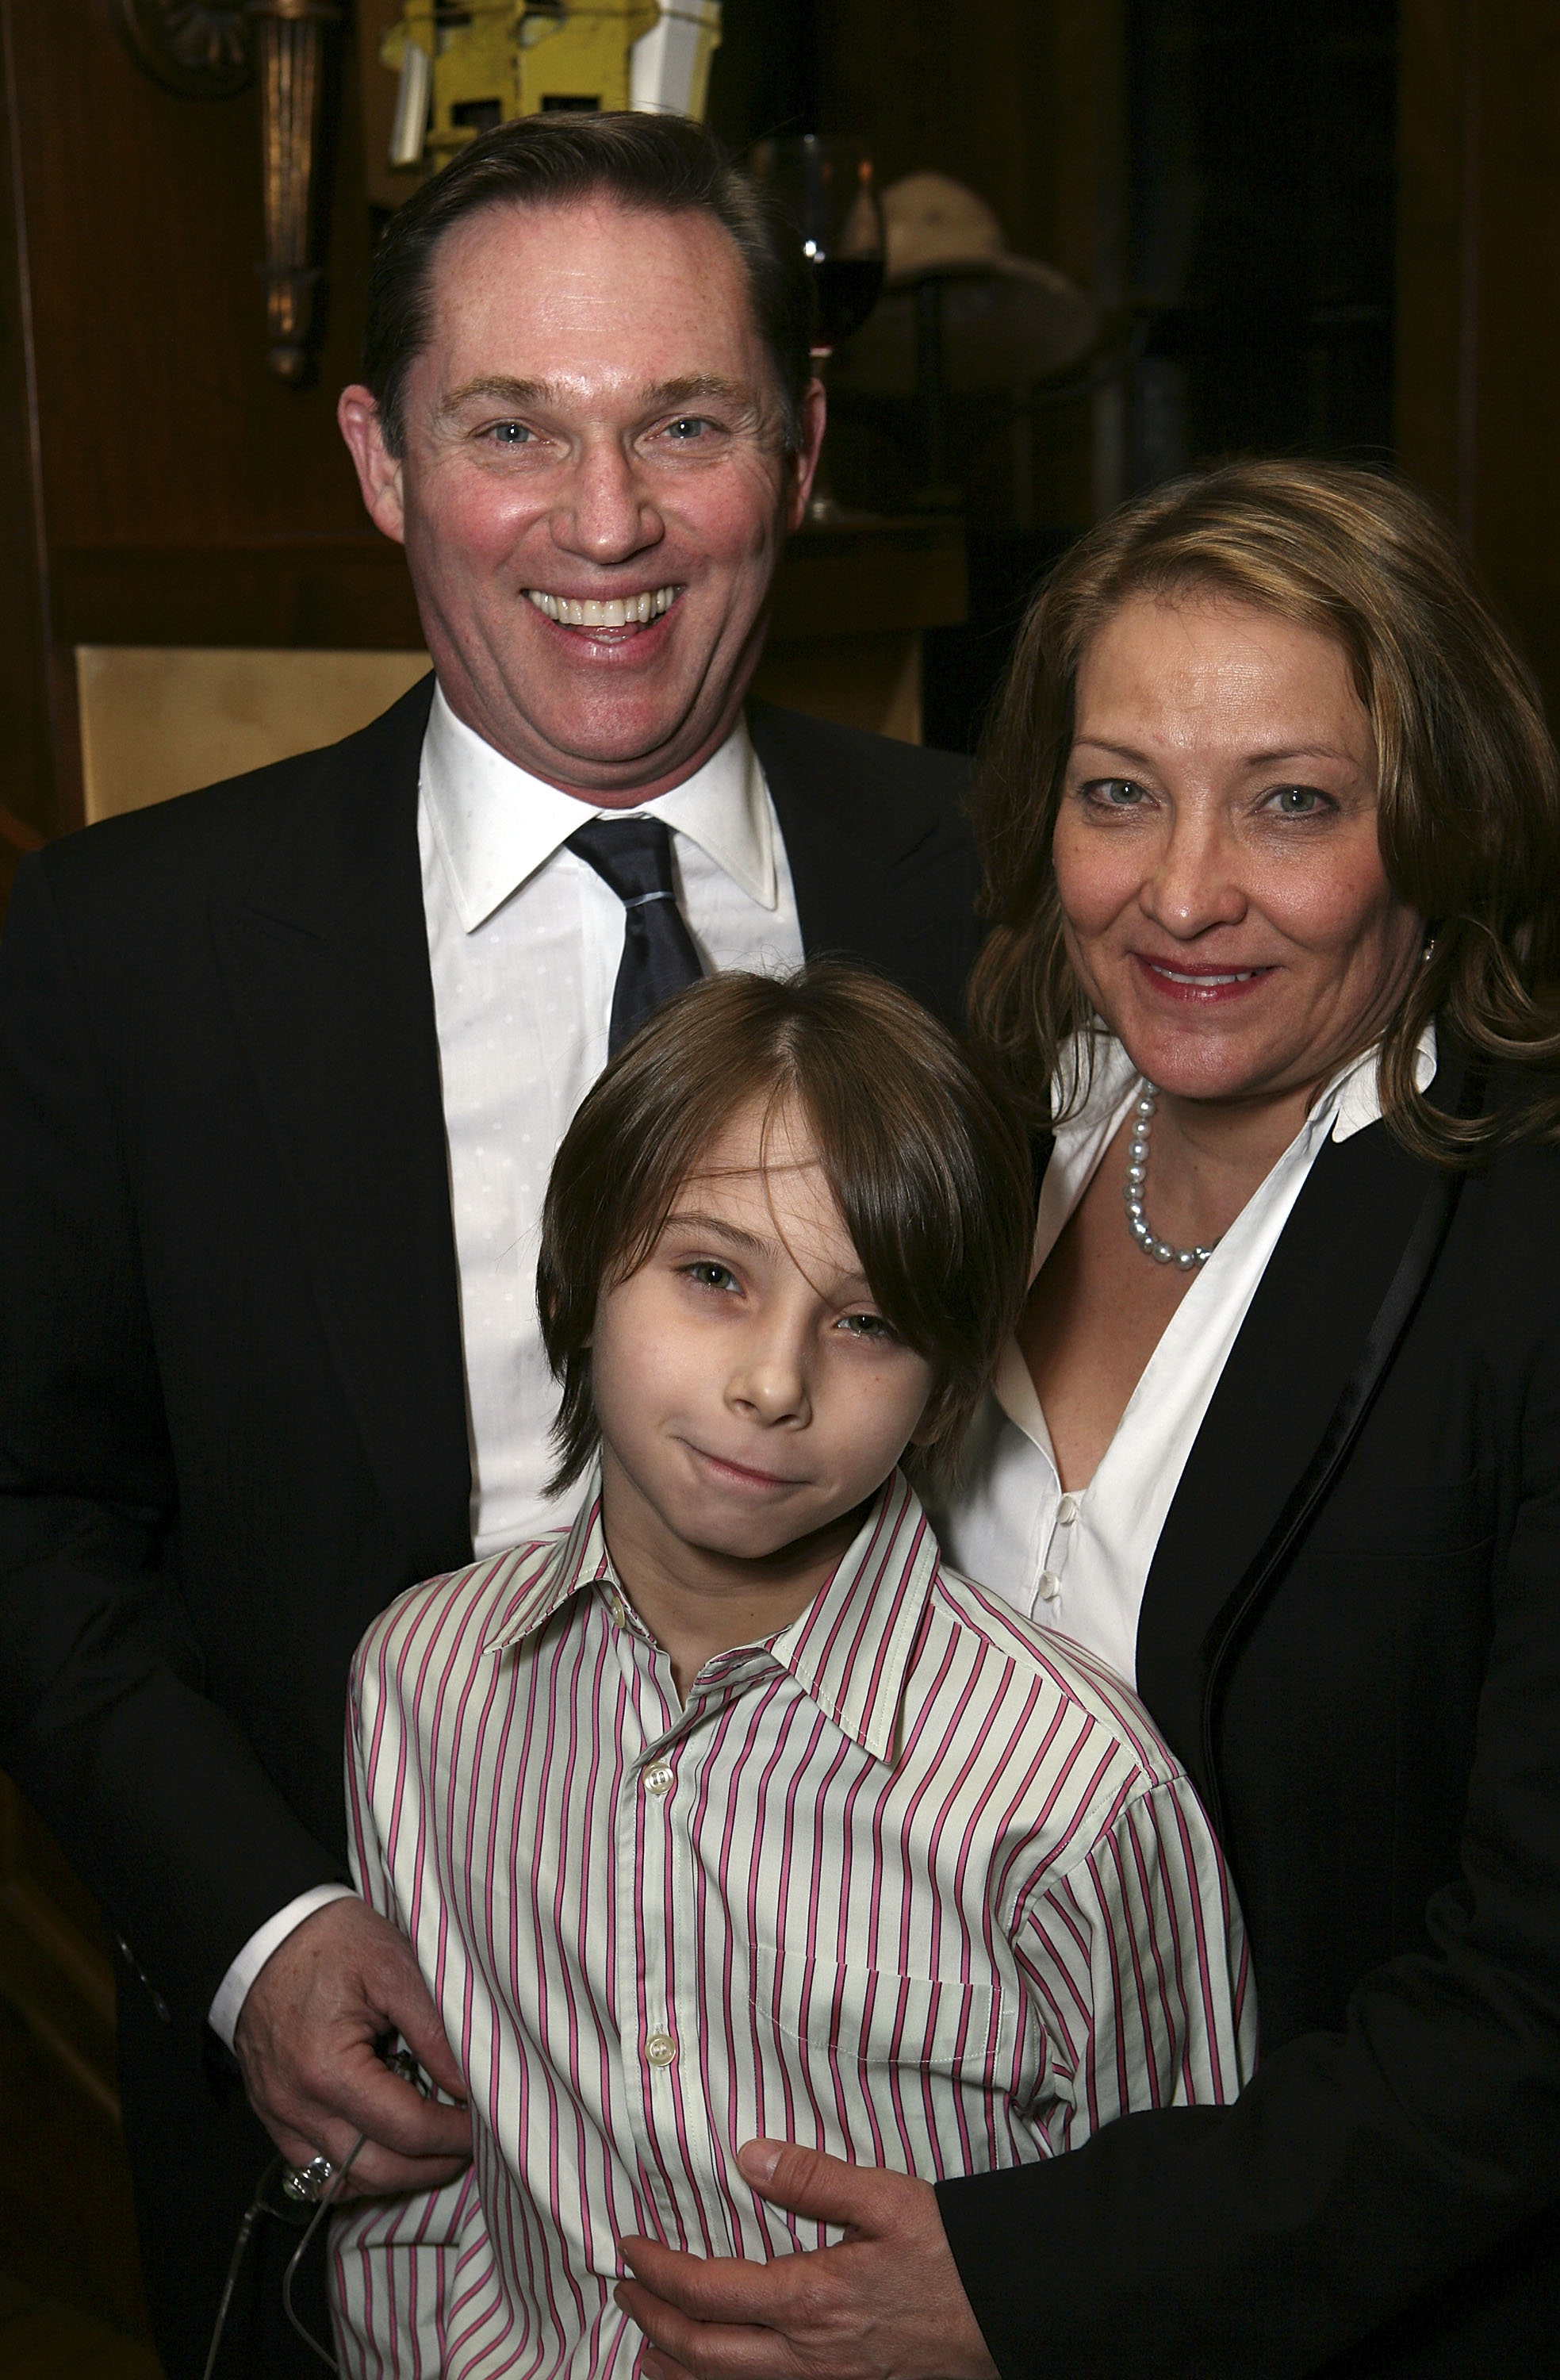 Richard Thomas with his son Montana and wife Georgiana during the party for the opening night performance of "Twelve Angry Men" on March 29, 2007, in Los Angeles, California | Source: Getty Images